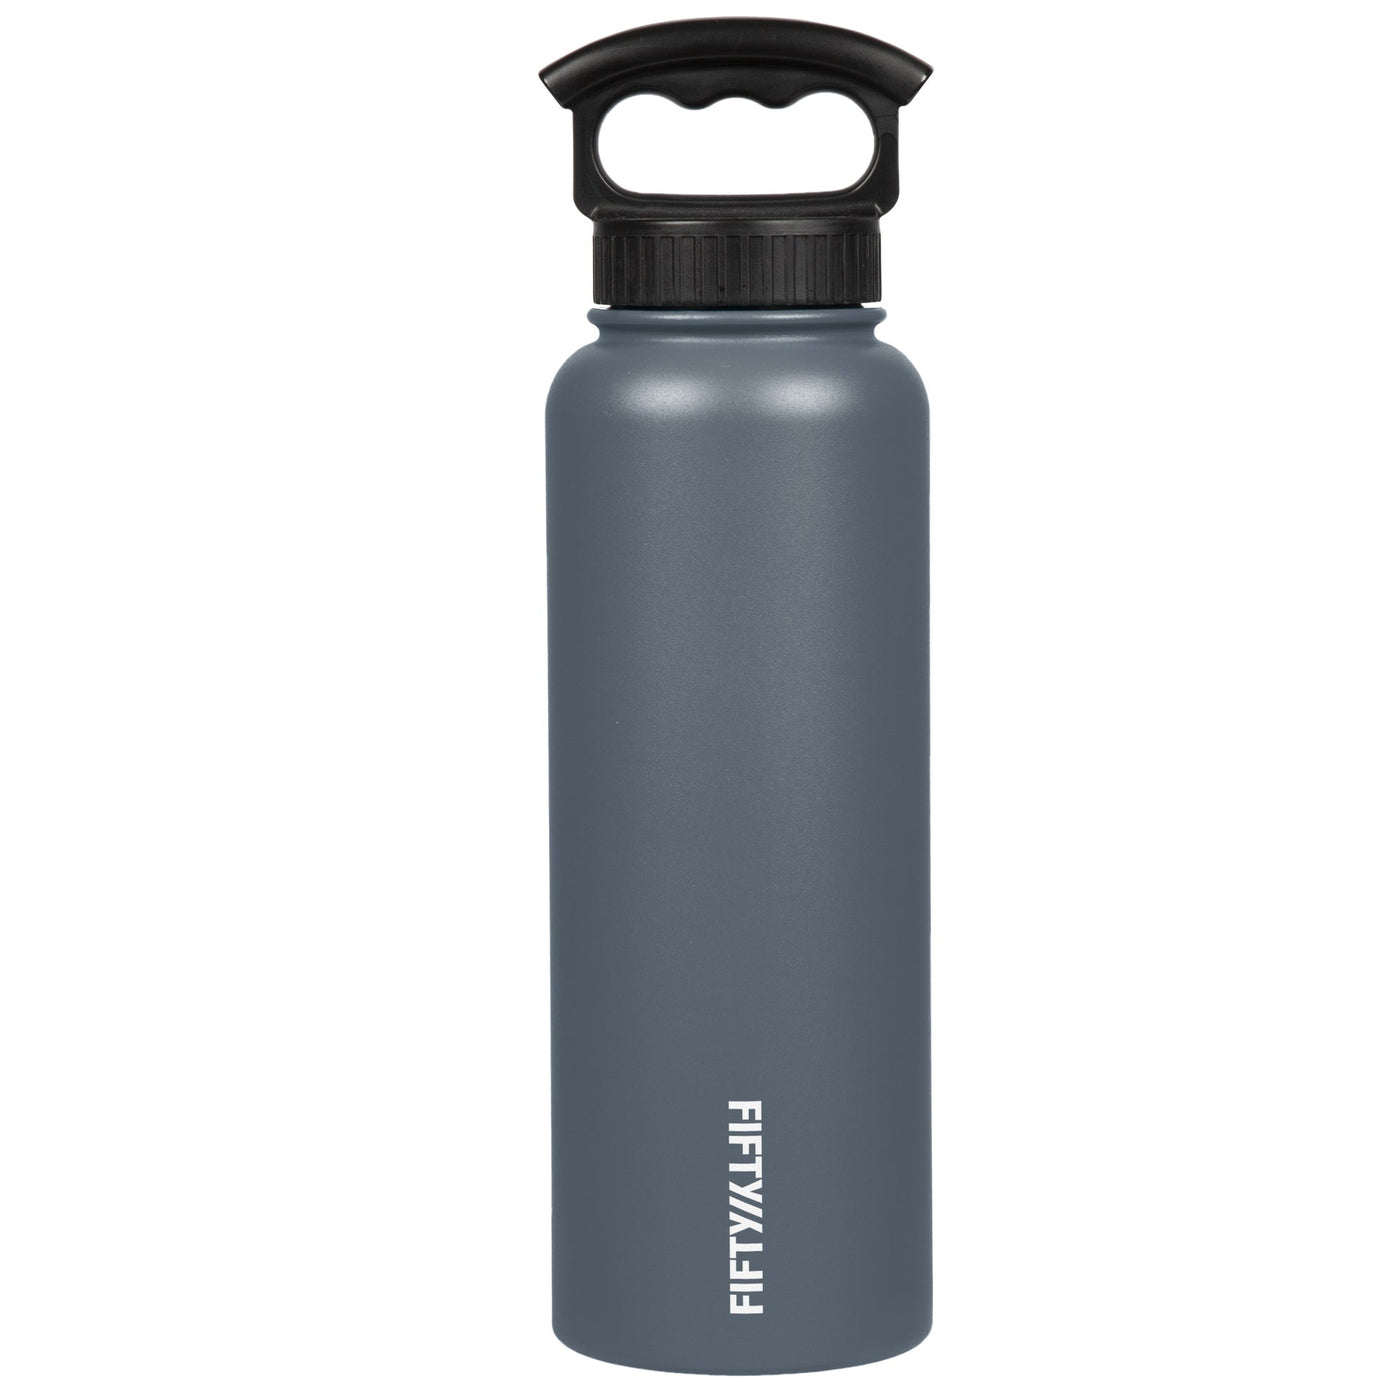 AAA.com l Thermos l 40oz Icon Stainless Steel Water Bottle w